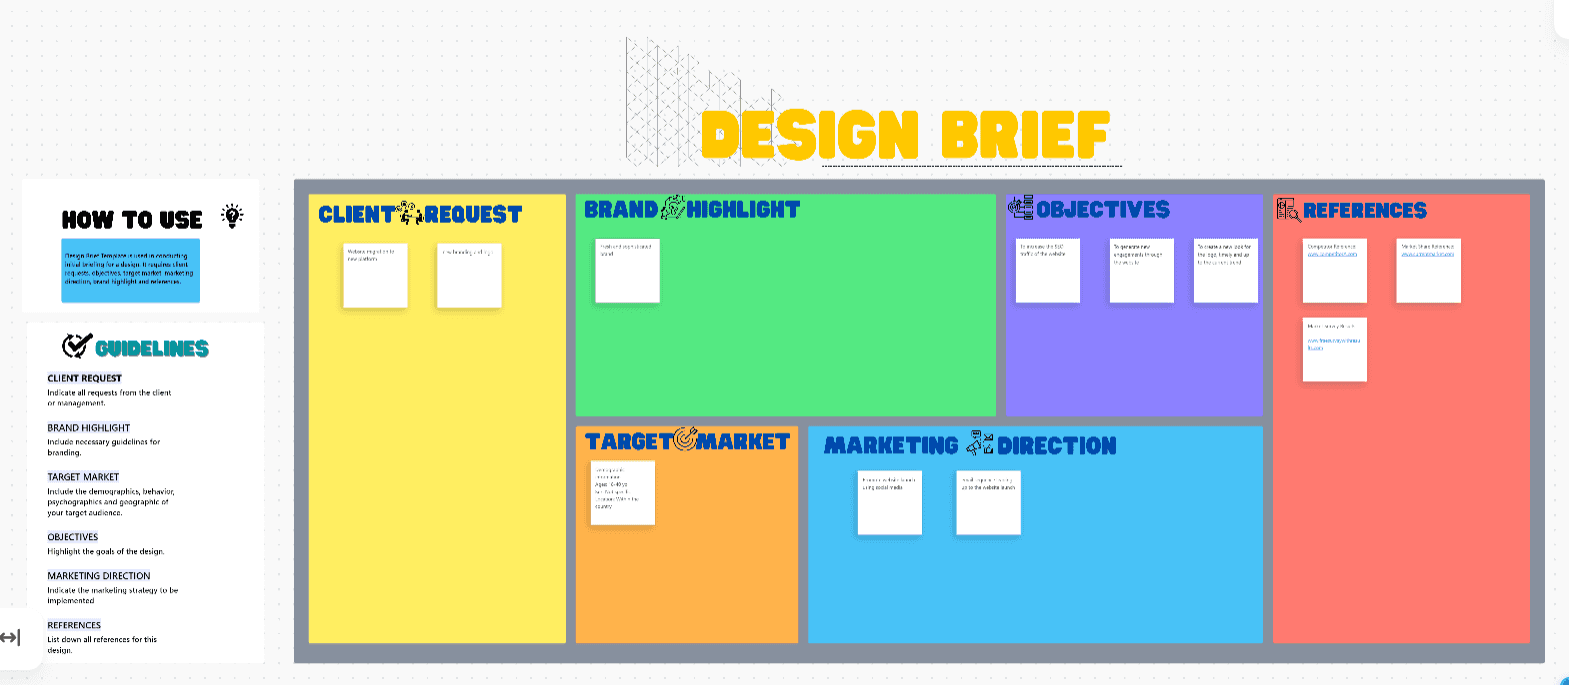 Design Brief Whiteboard Template is used in conducting the initial briefing for a design. It requires client requests, objectives, target market, marketing direction, brand highlights, and references.